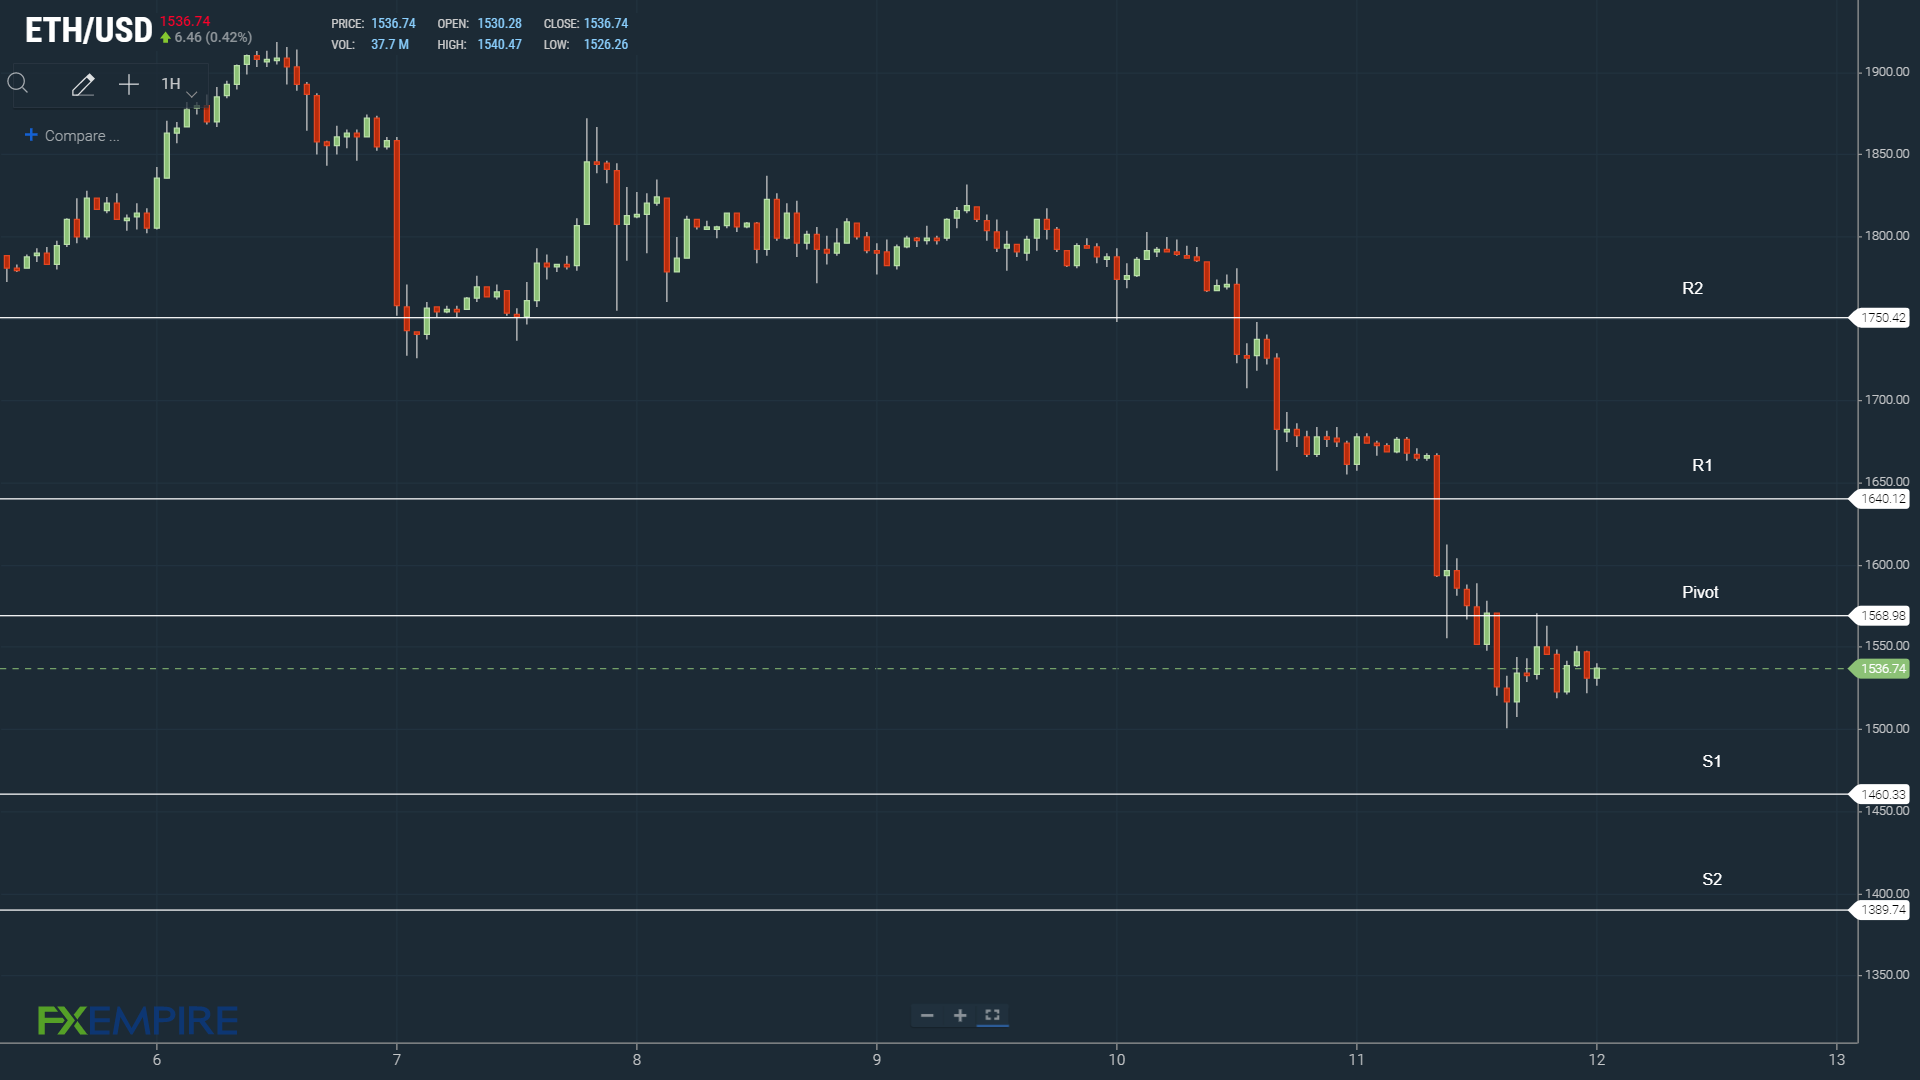 Failure to return to $1,600 could bring sub-$1,500 into play.